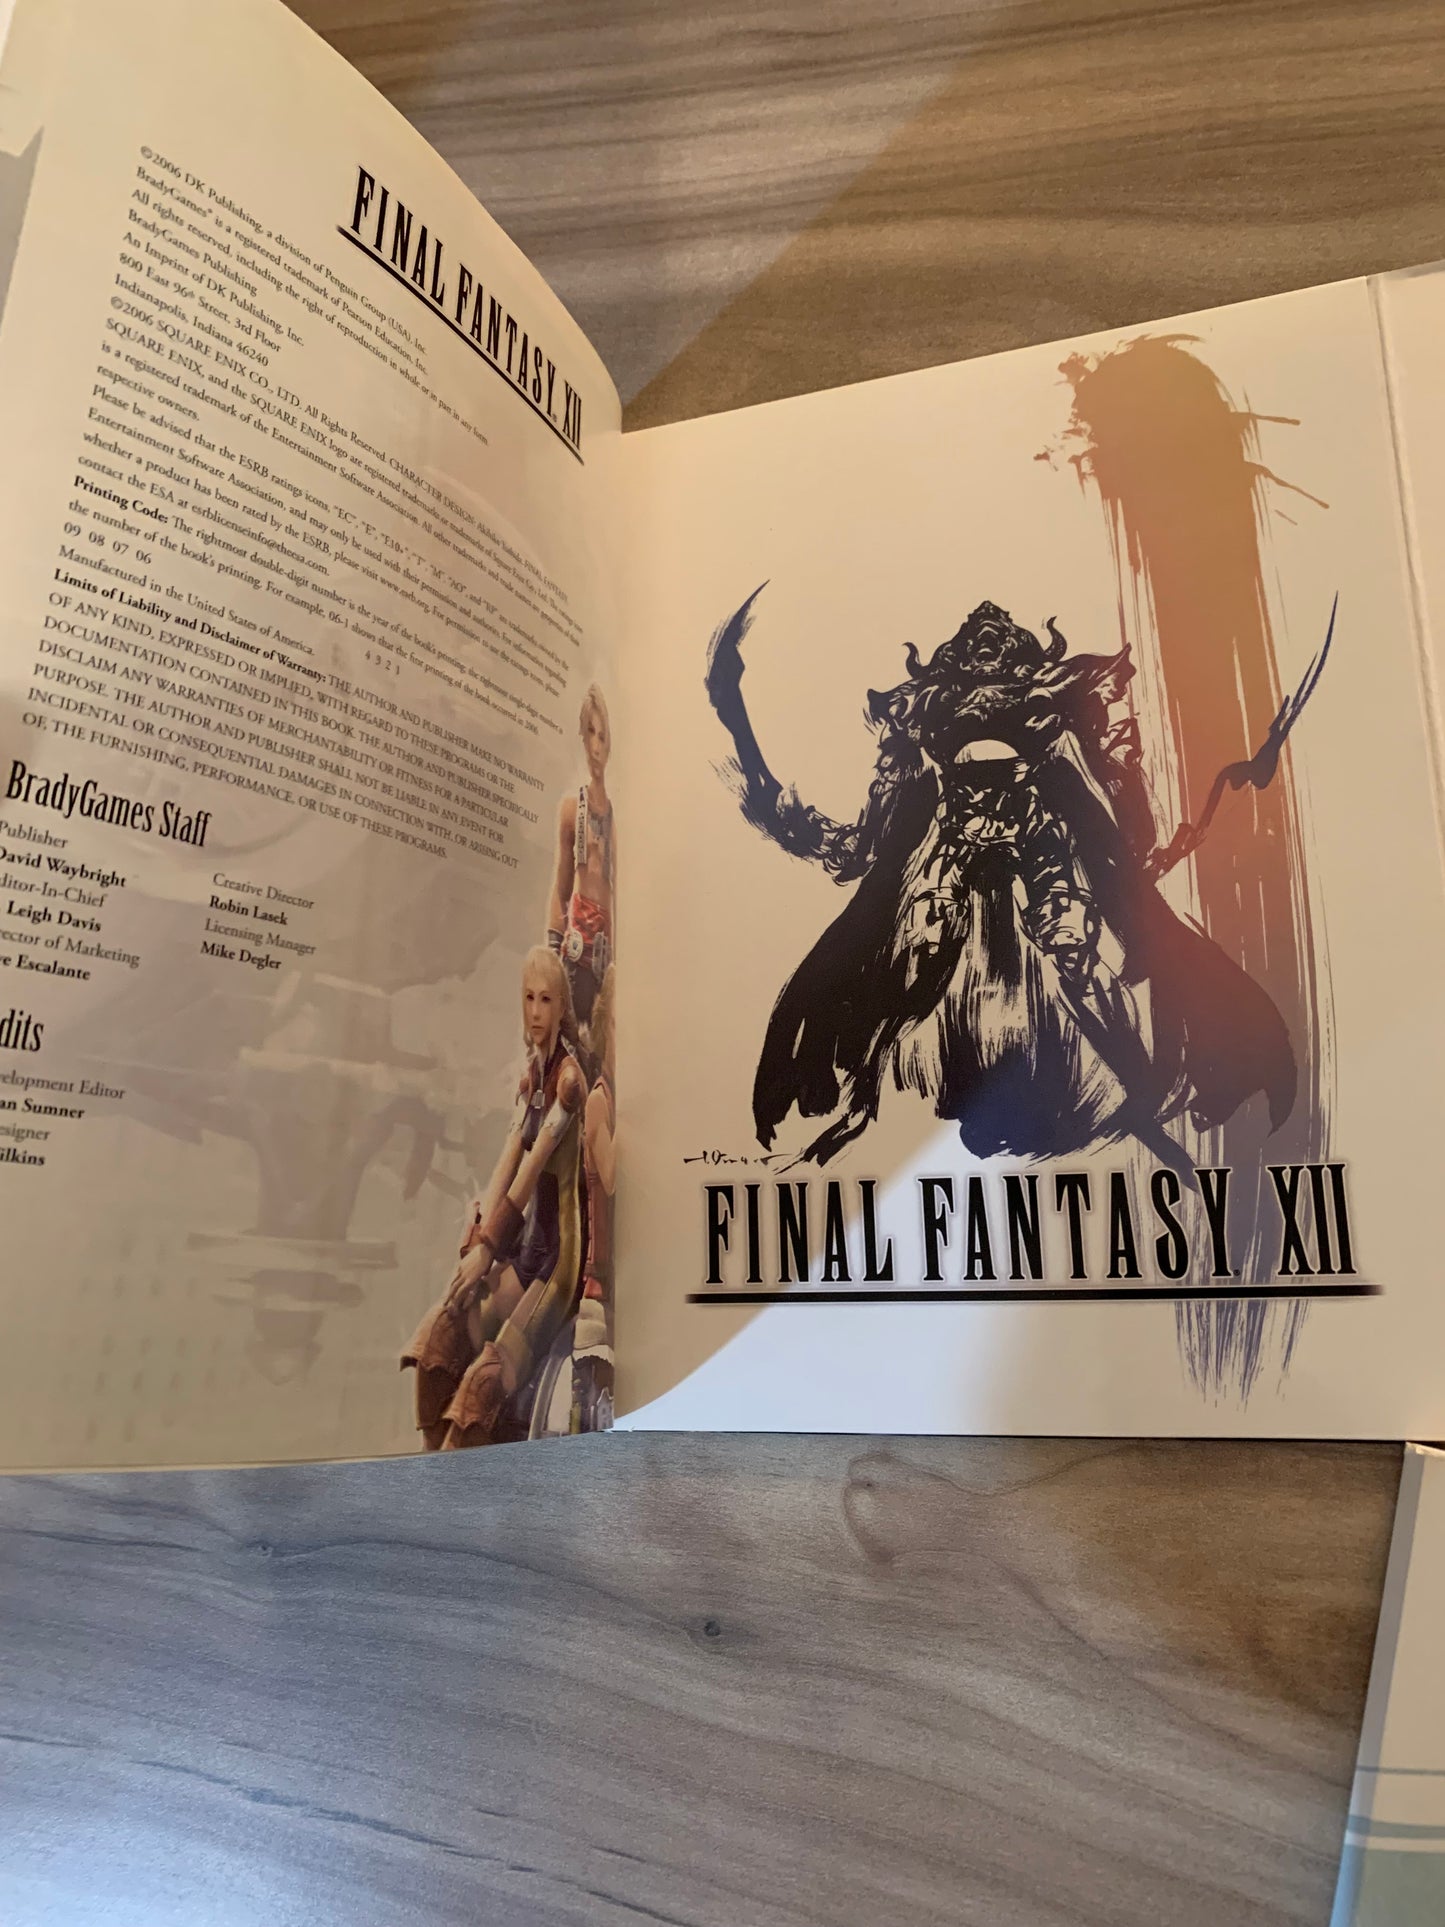 FiNAL FANTASY XII STRATEGY GUiDE BRADYGAMES HARDCOVER LiMiTED COLLECTORS EDiTiON